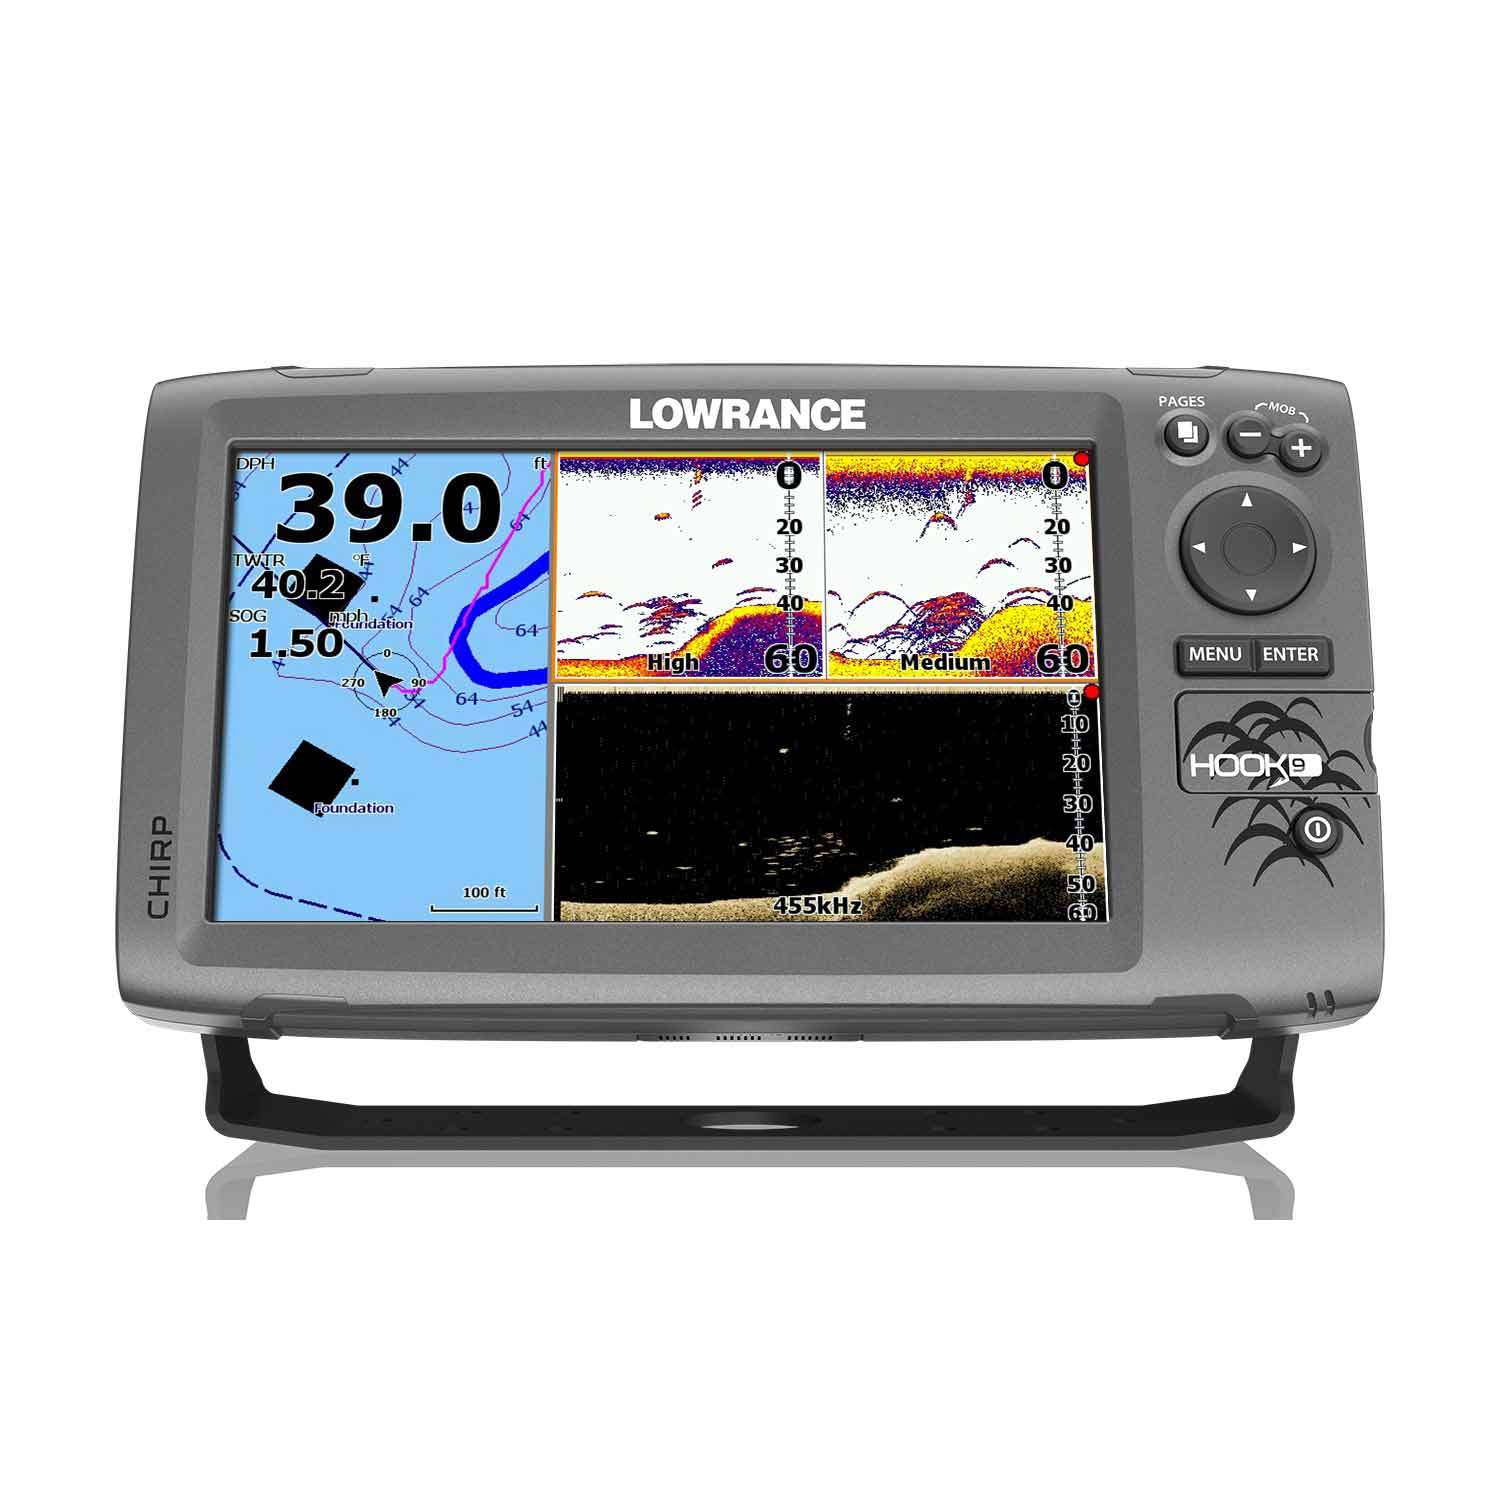 LOWRANCE Hook-9 Fishfinder/Chartplotter with Mid/High CHIRP